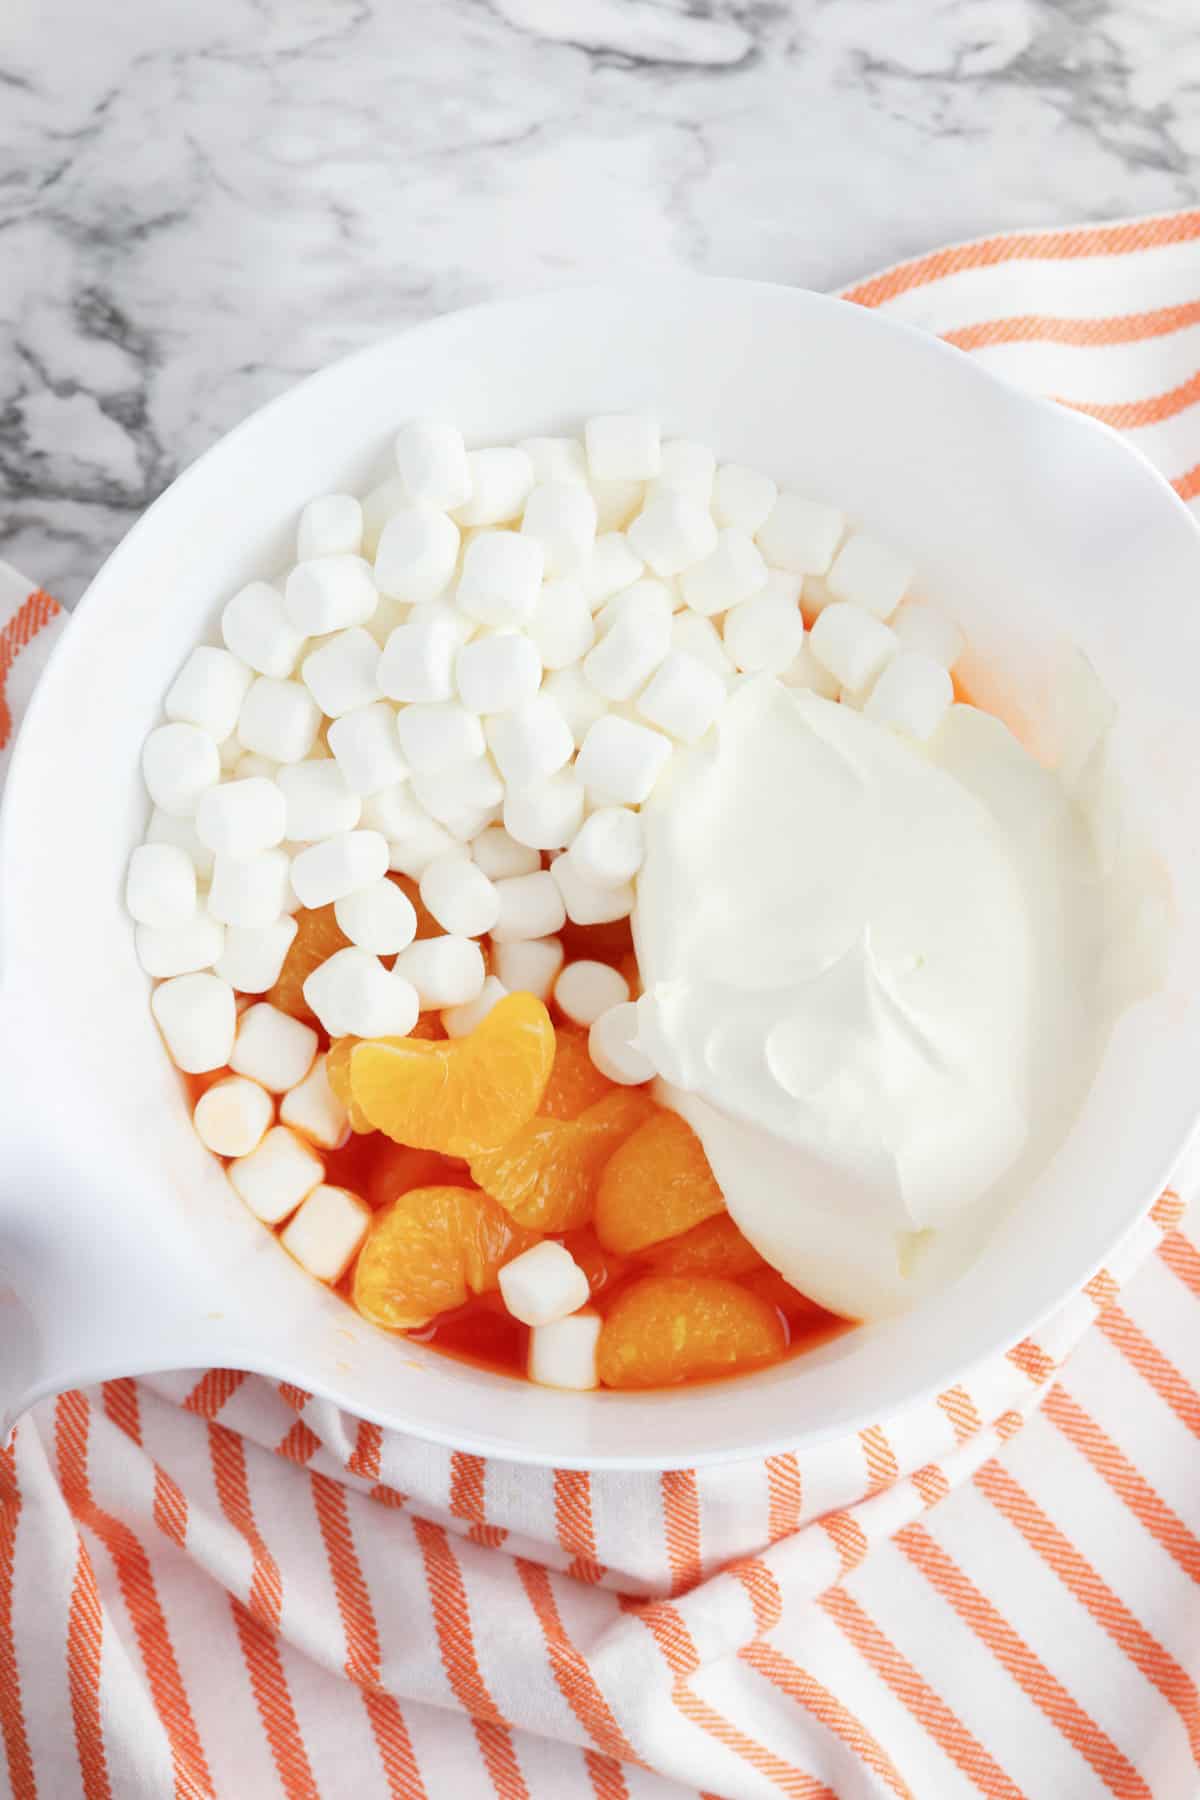 Mandarin oranges, mini marshmallows, and whipped topping added to jello in mixing bowl.